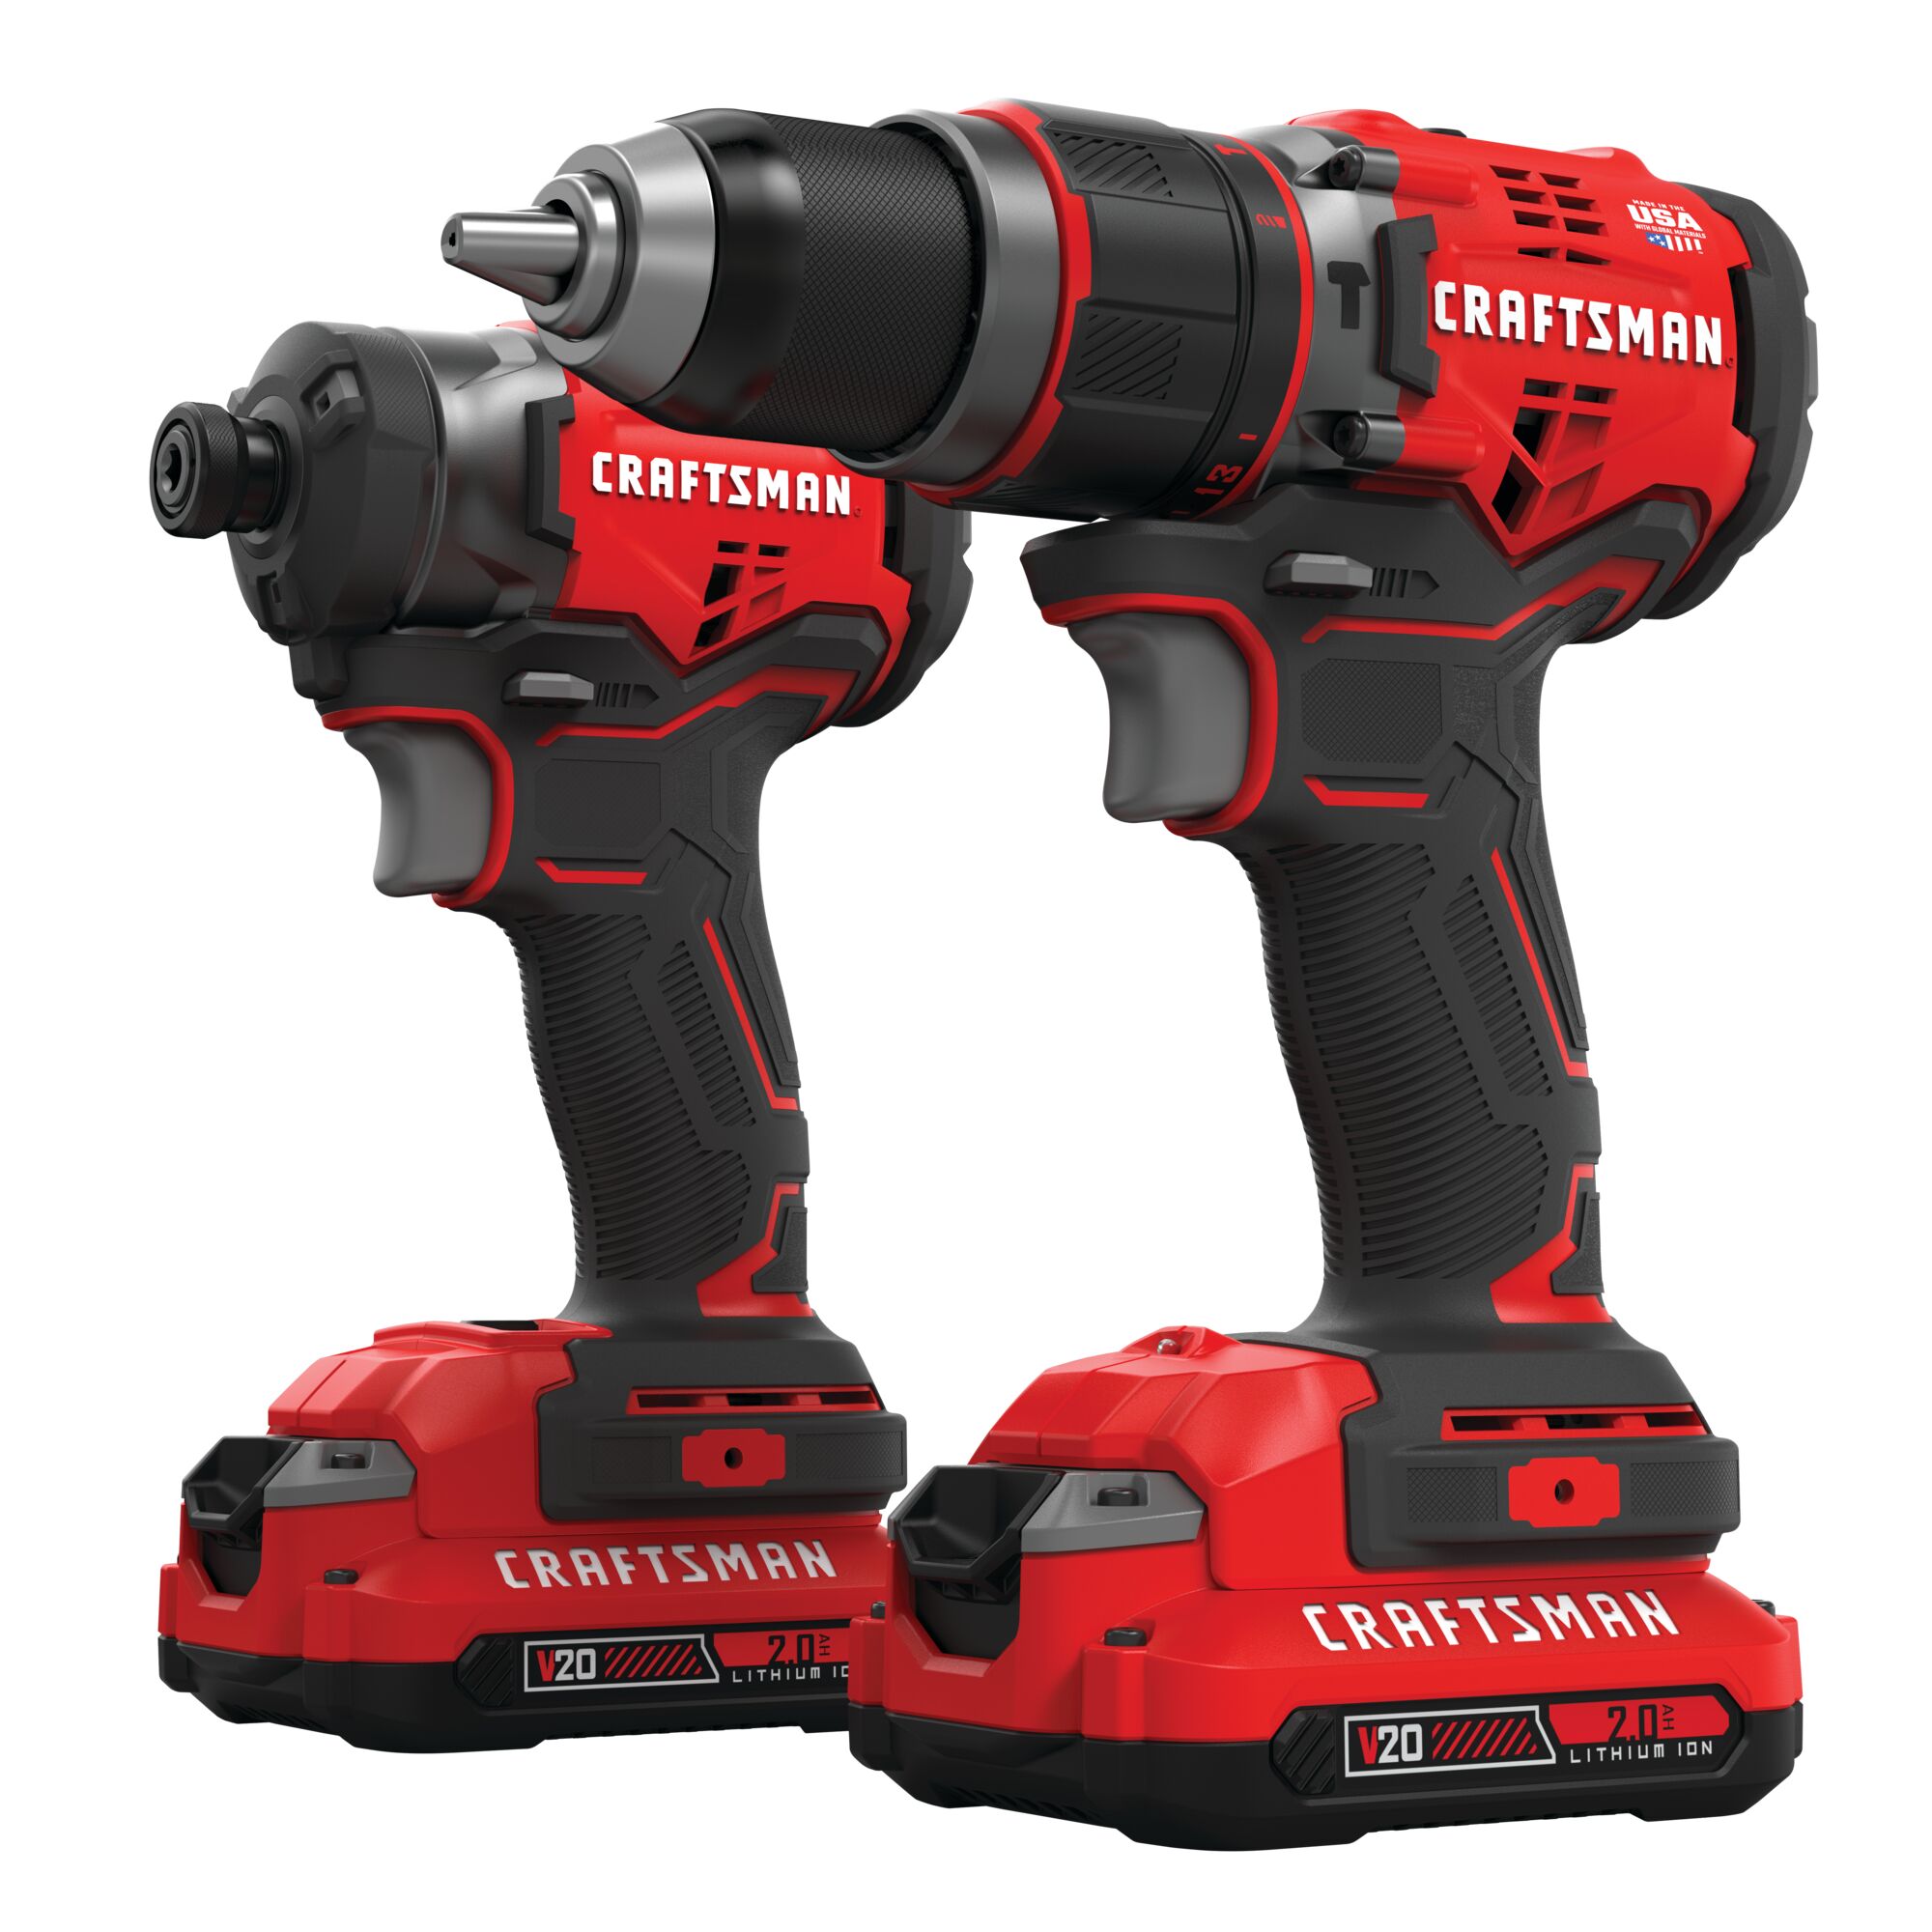 View of CRAFTSMAN Combo Kits: Power Tools on white background